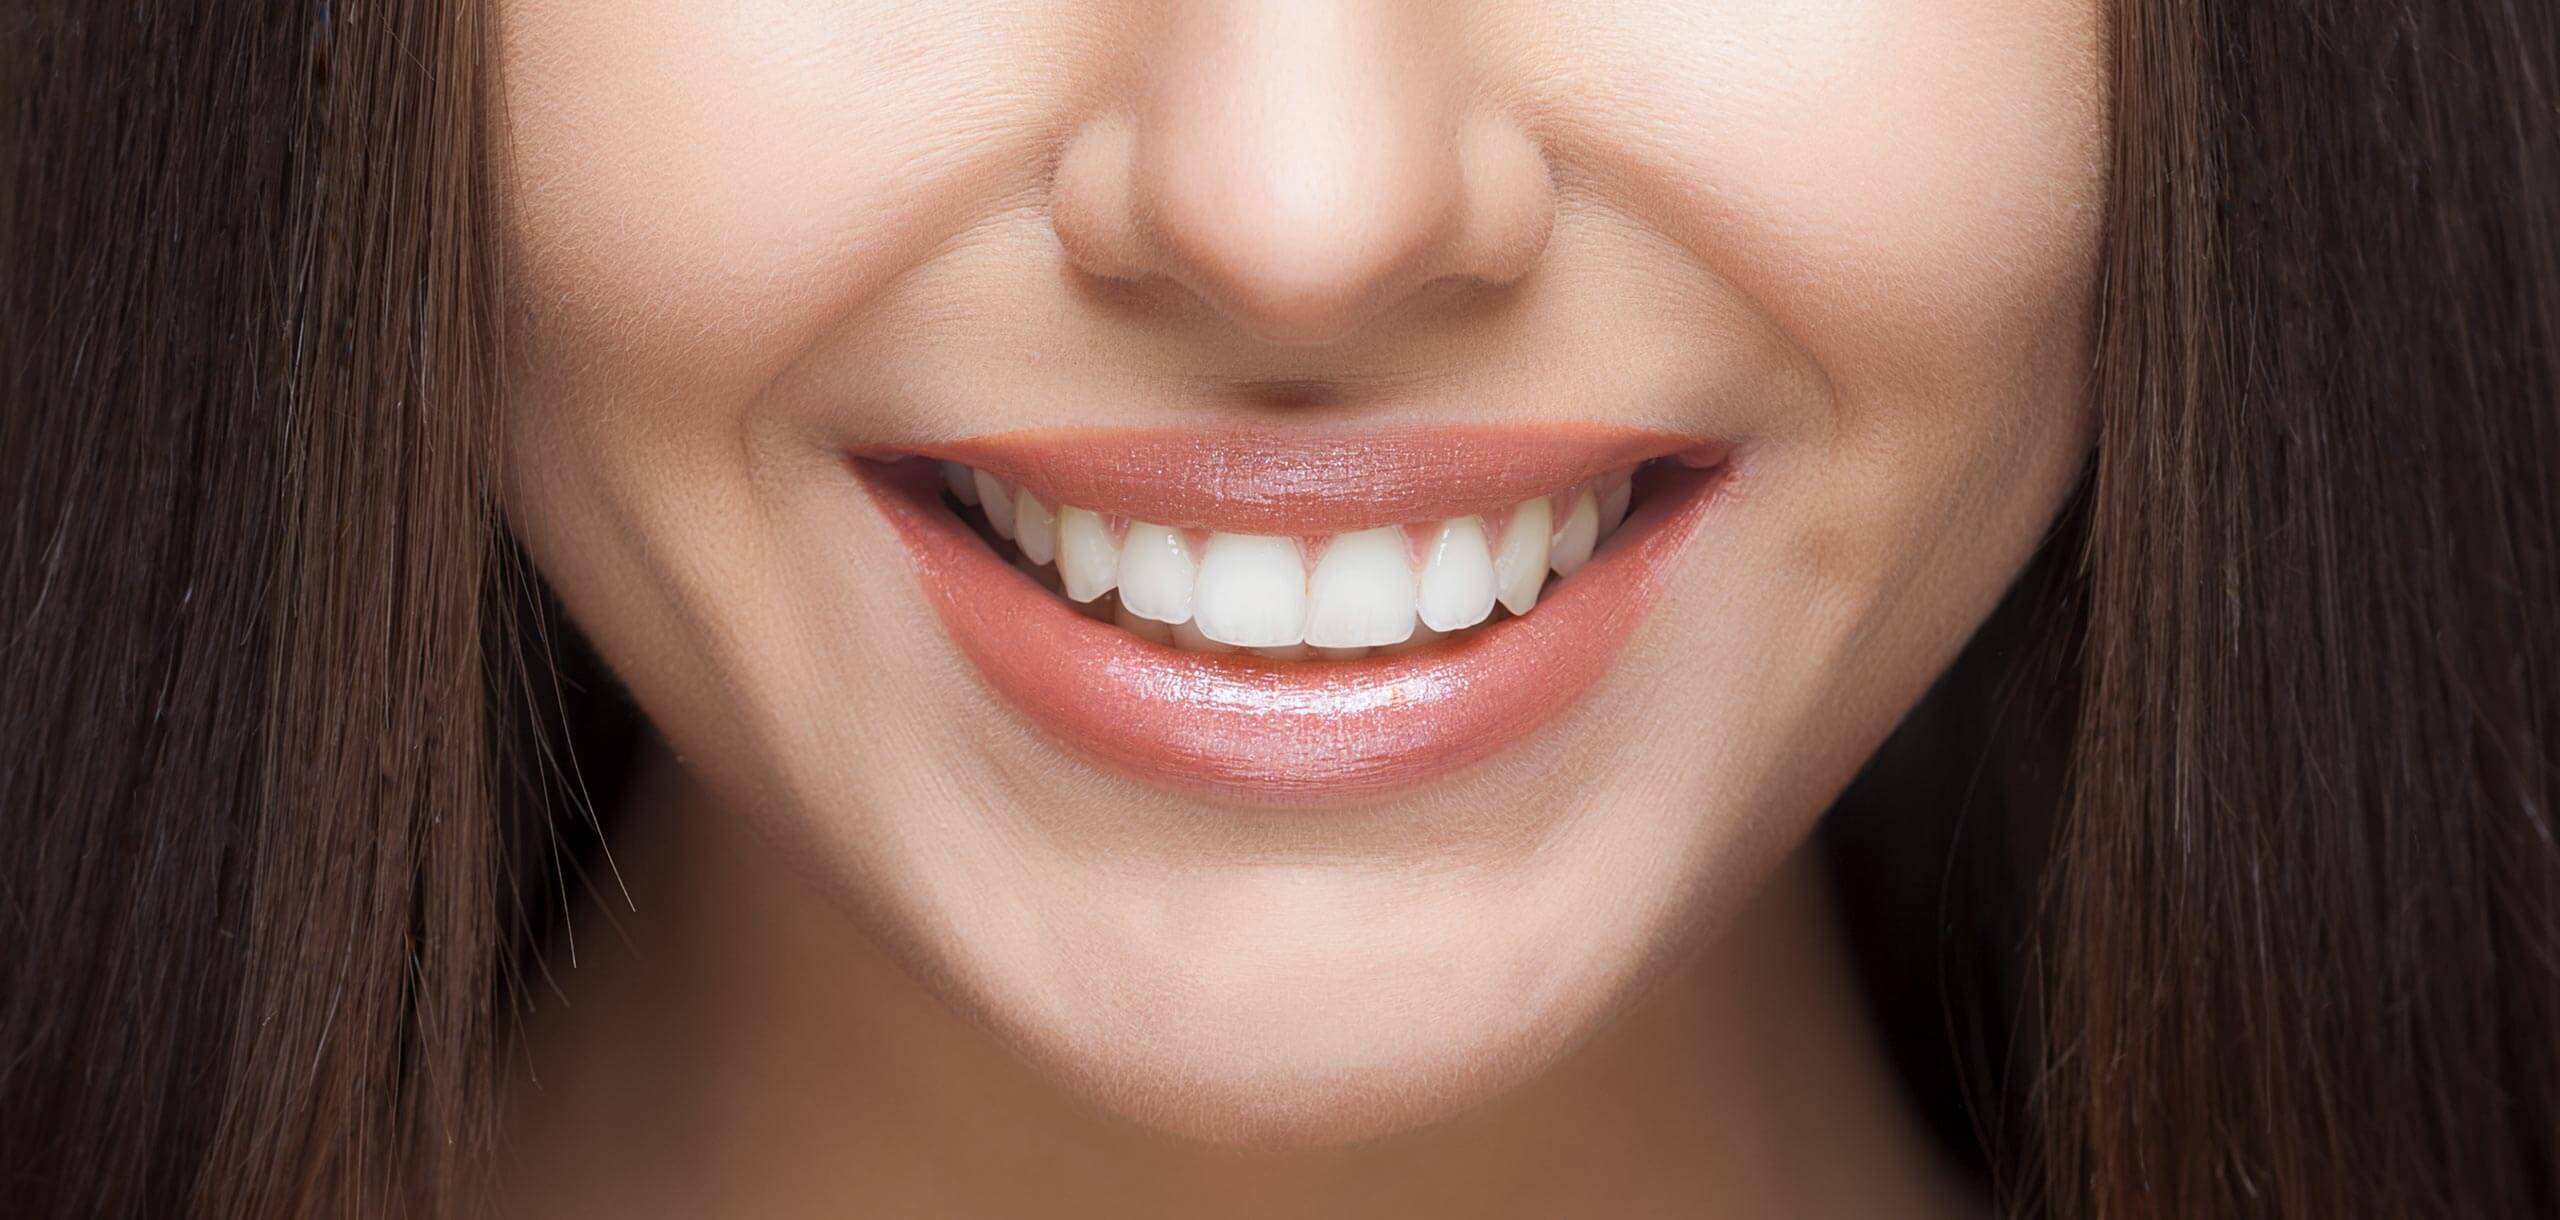 HOW TO BEAUTIFY YOUR SMILE AND LOOK GREAT IN PHOTOS?